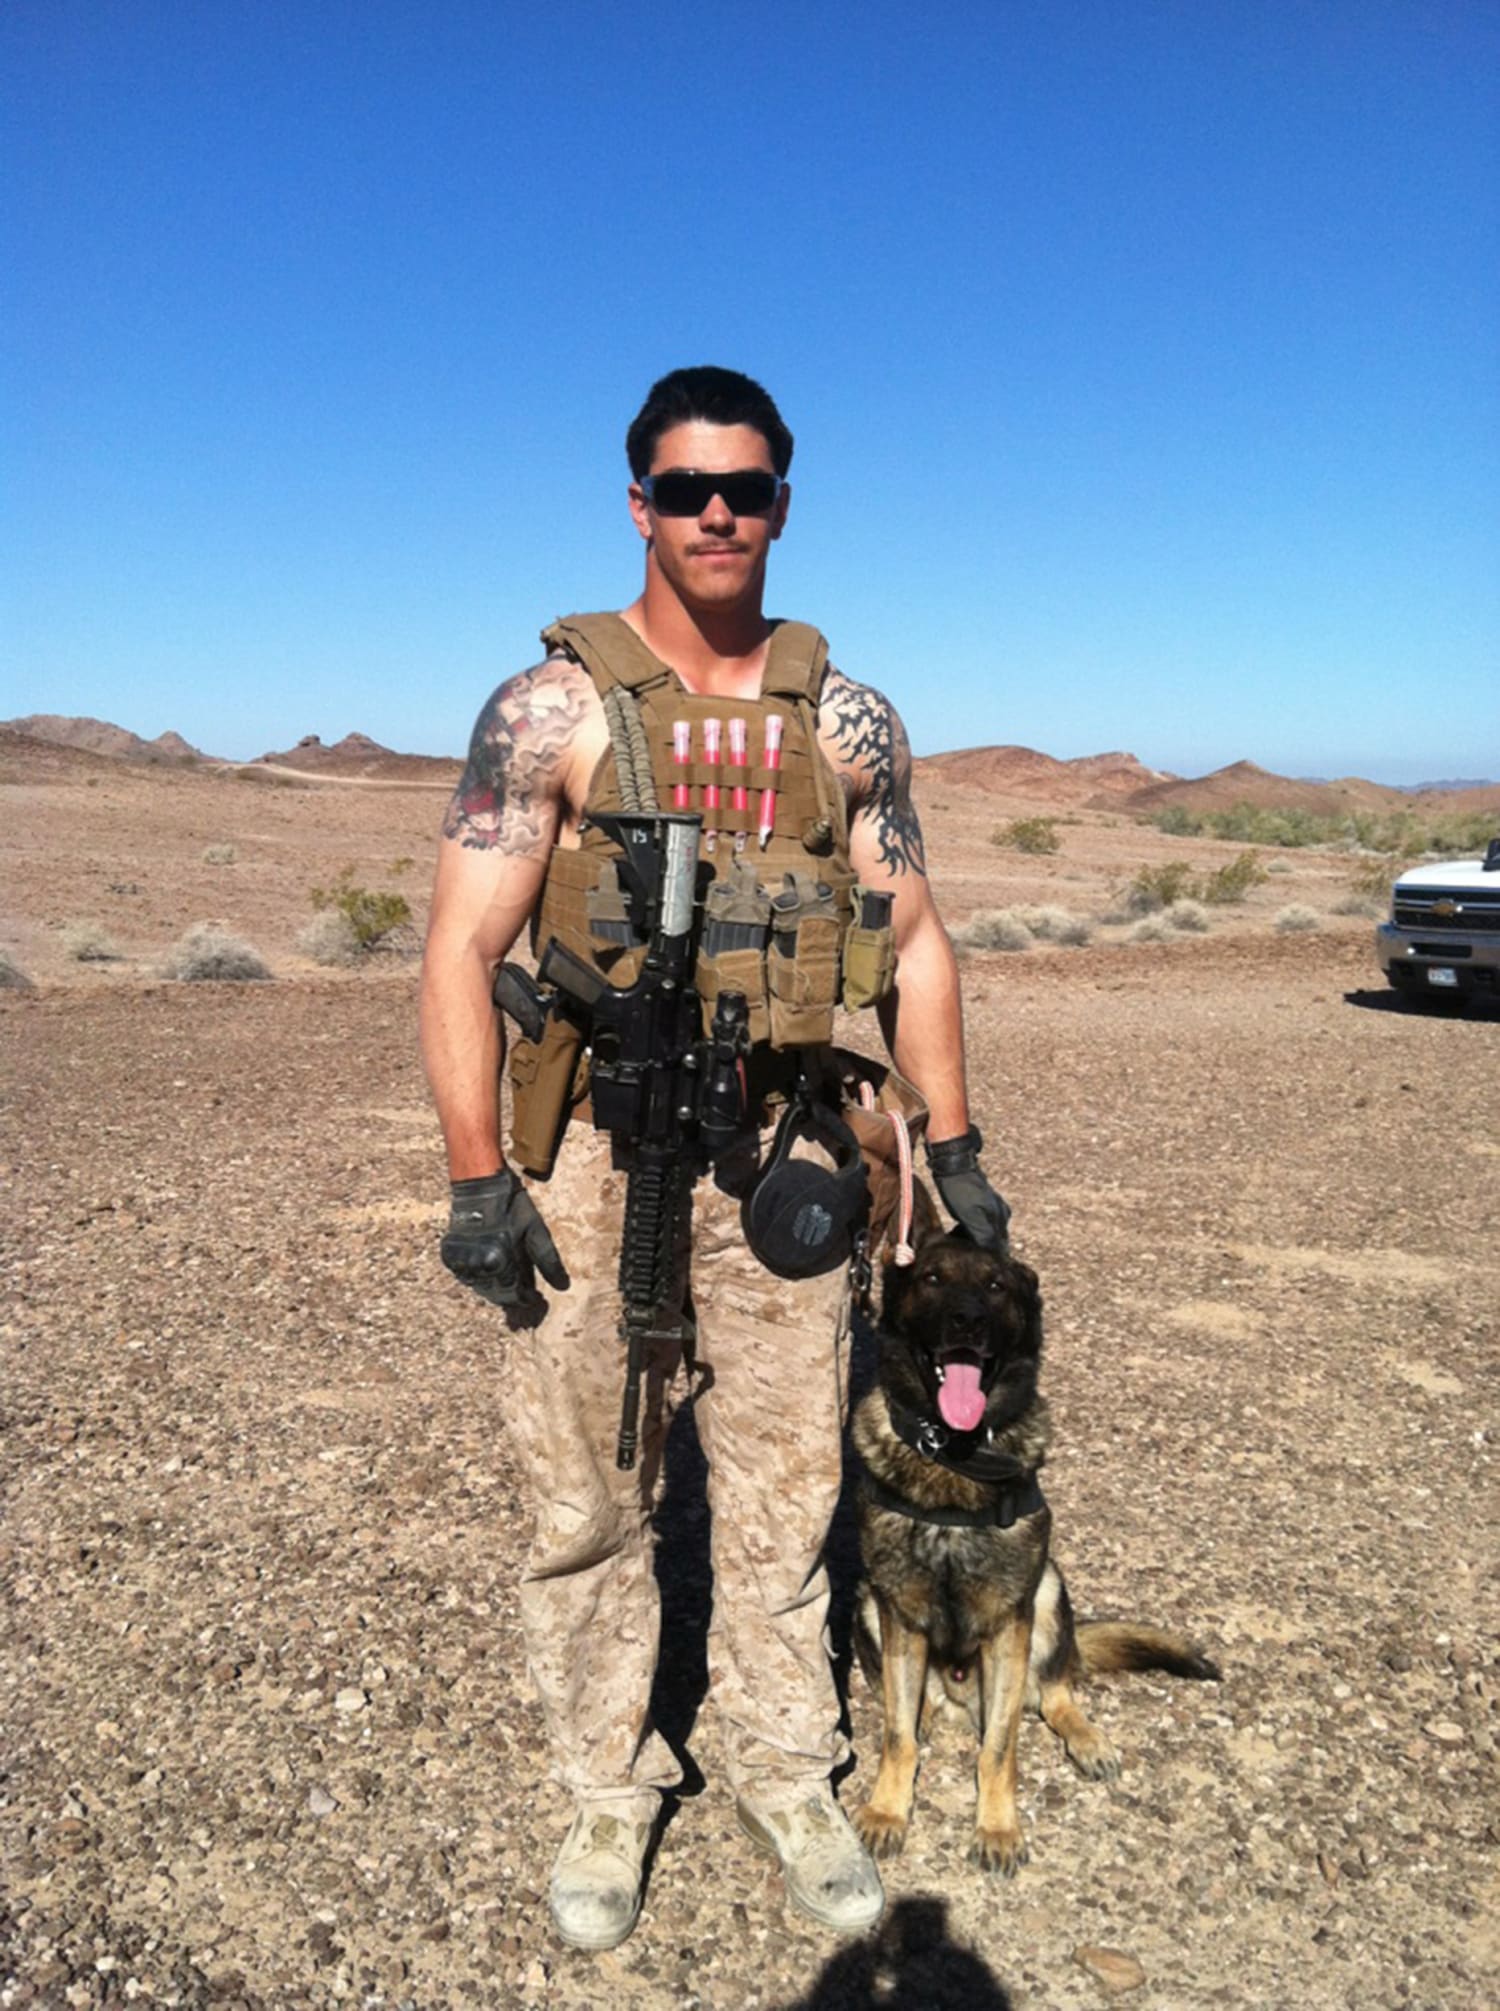 military dogs in combat